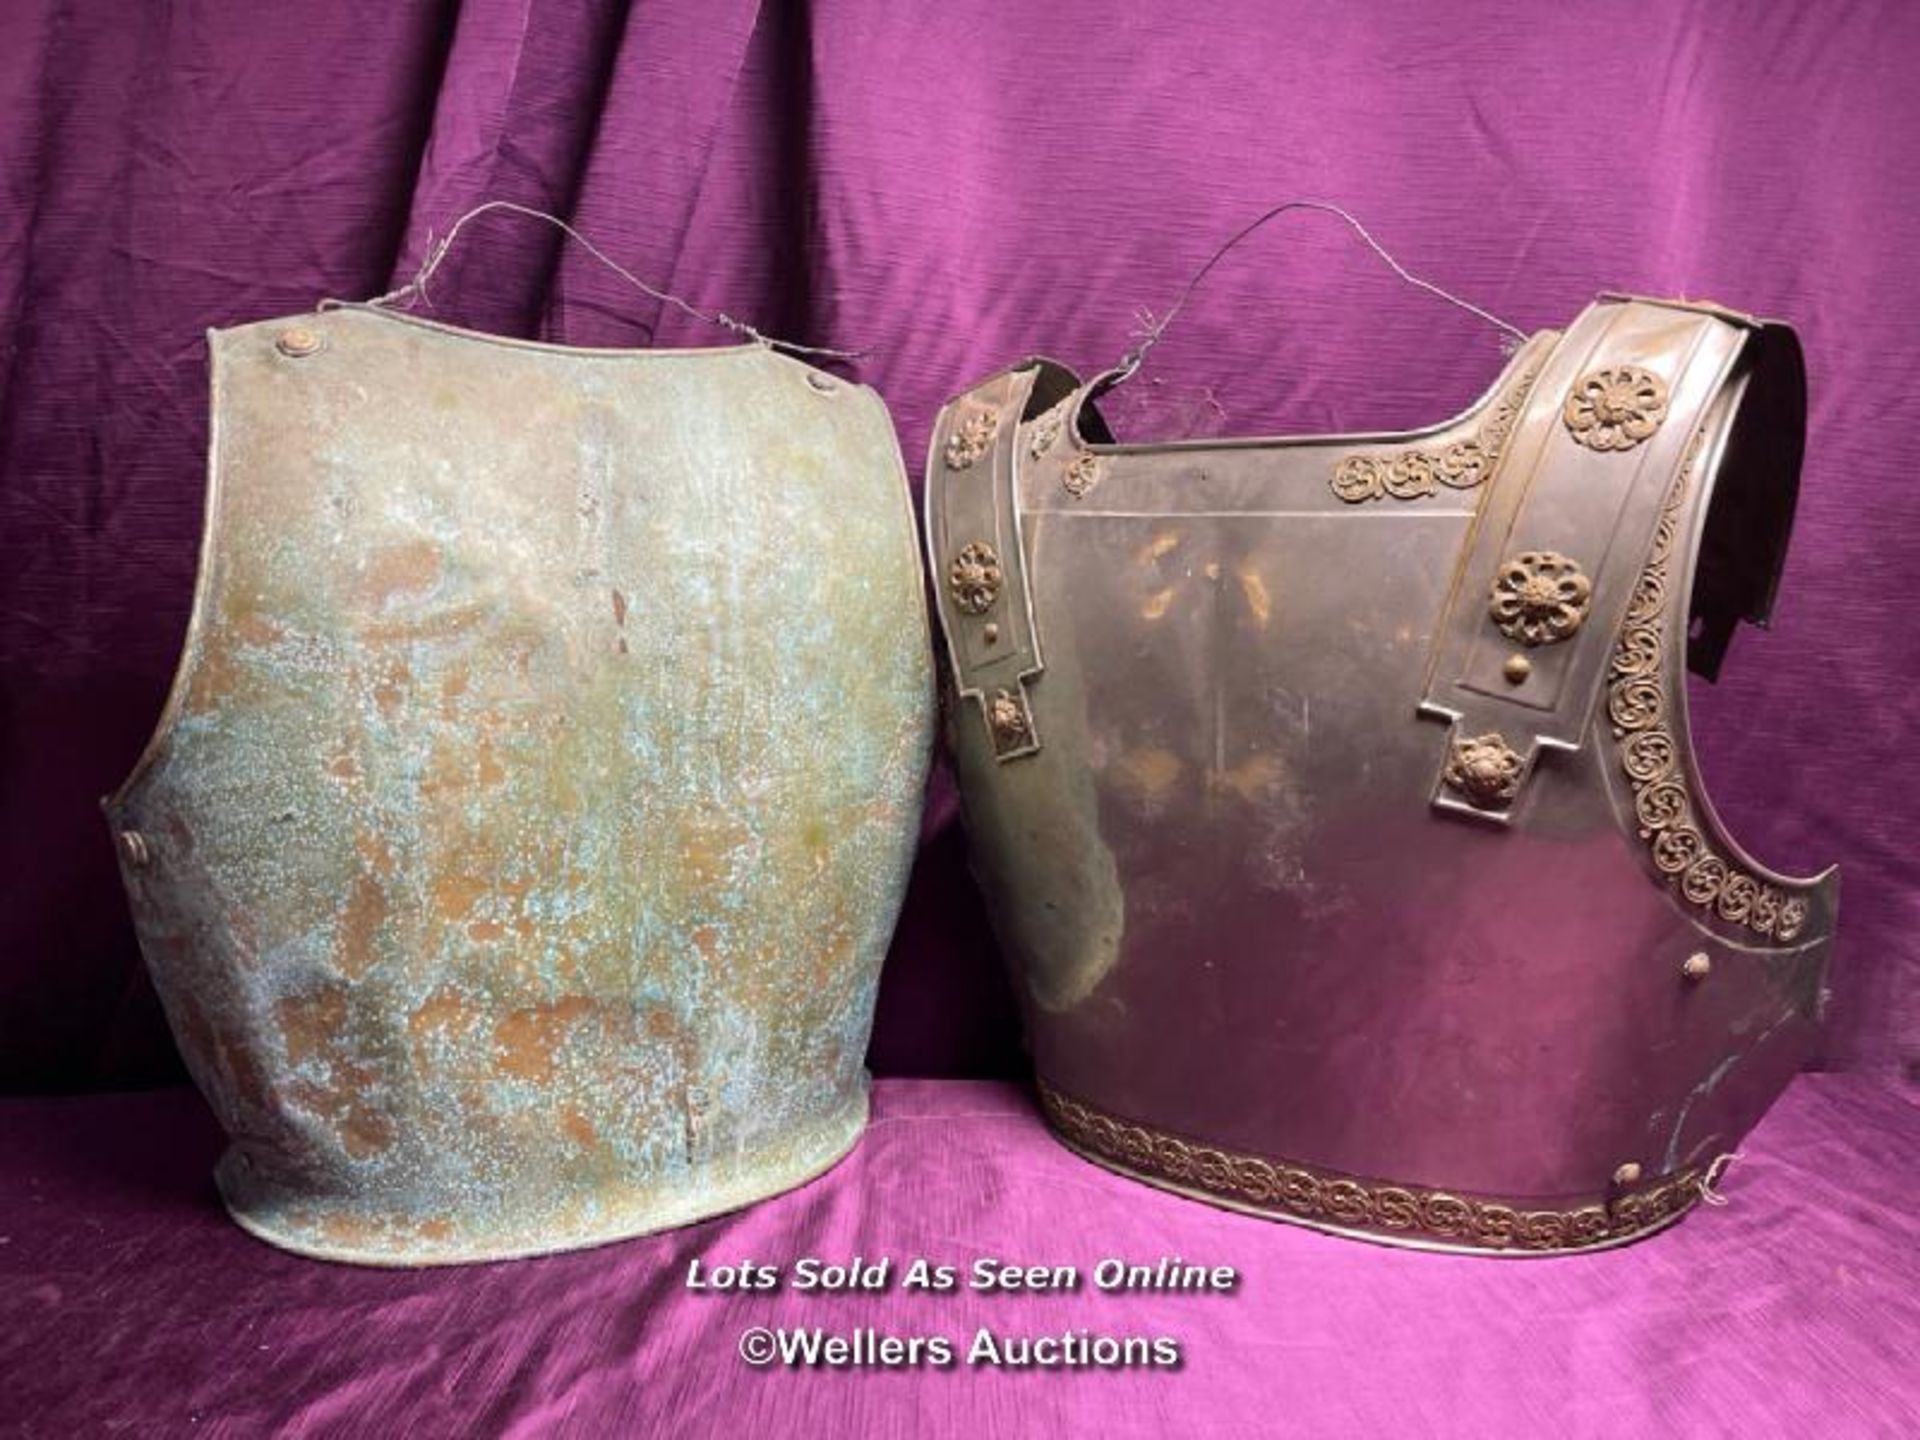 TWO 20TH CENTURY THEATRICAL BREAST PLATES